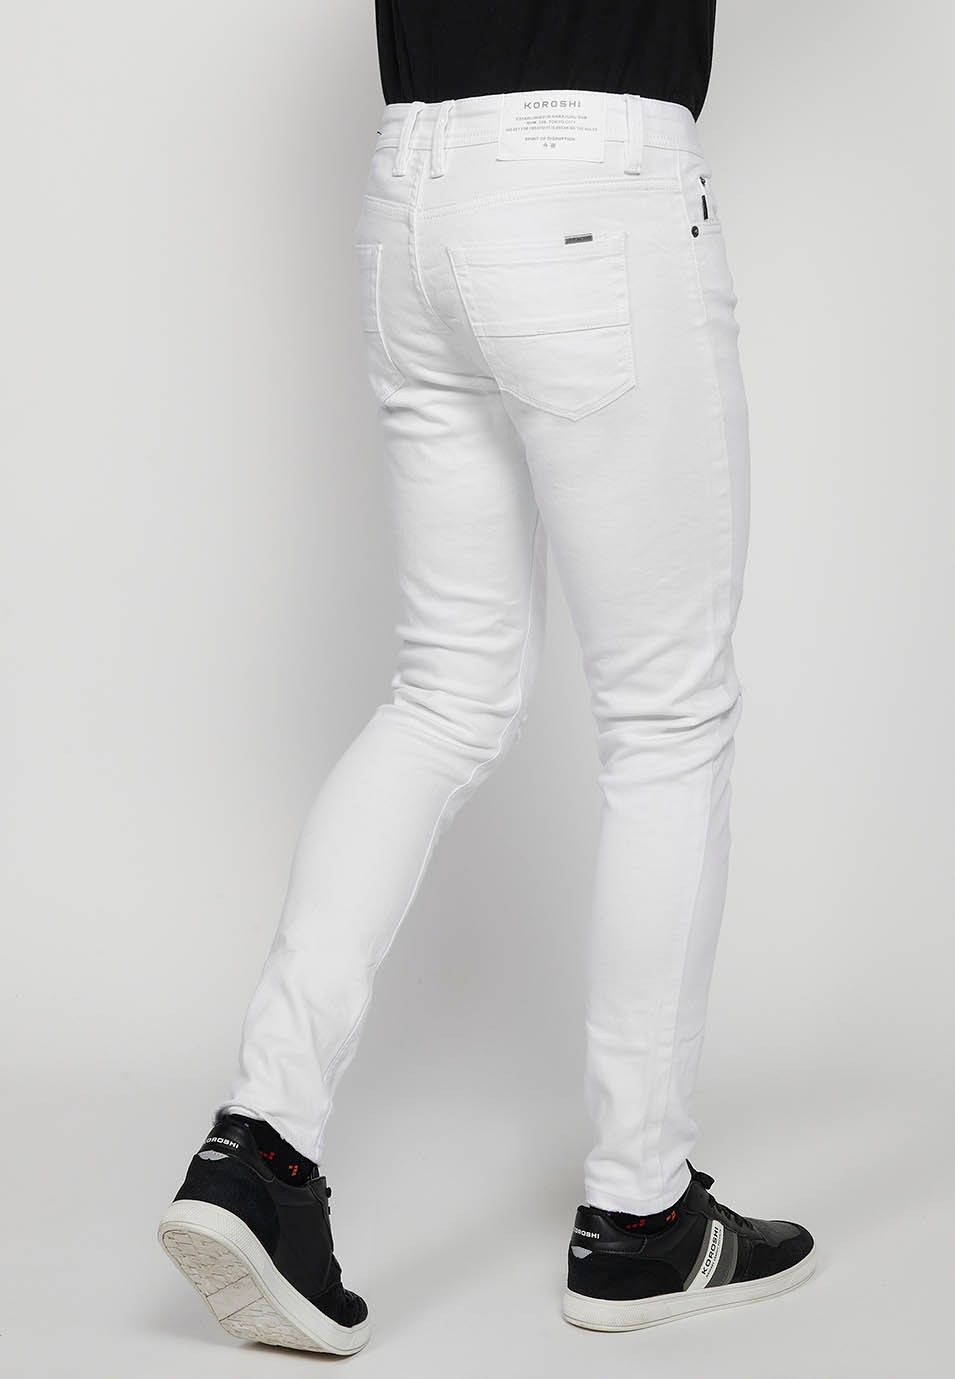 Super skinny jeans with front closure with zipper and button in White Denim for Men 8